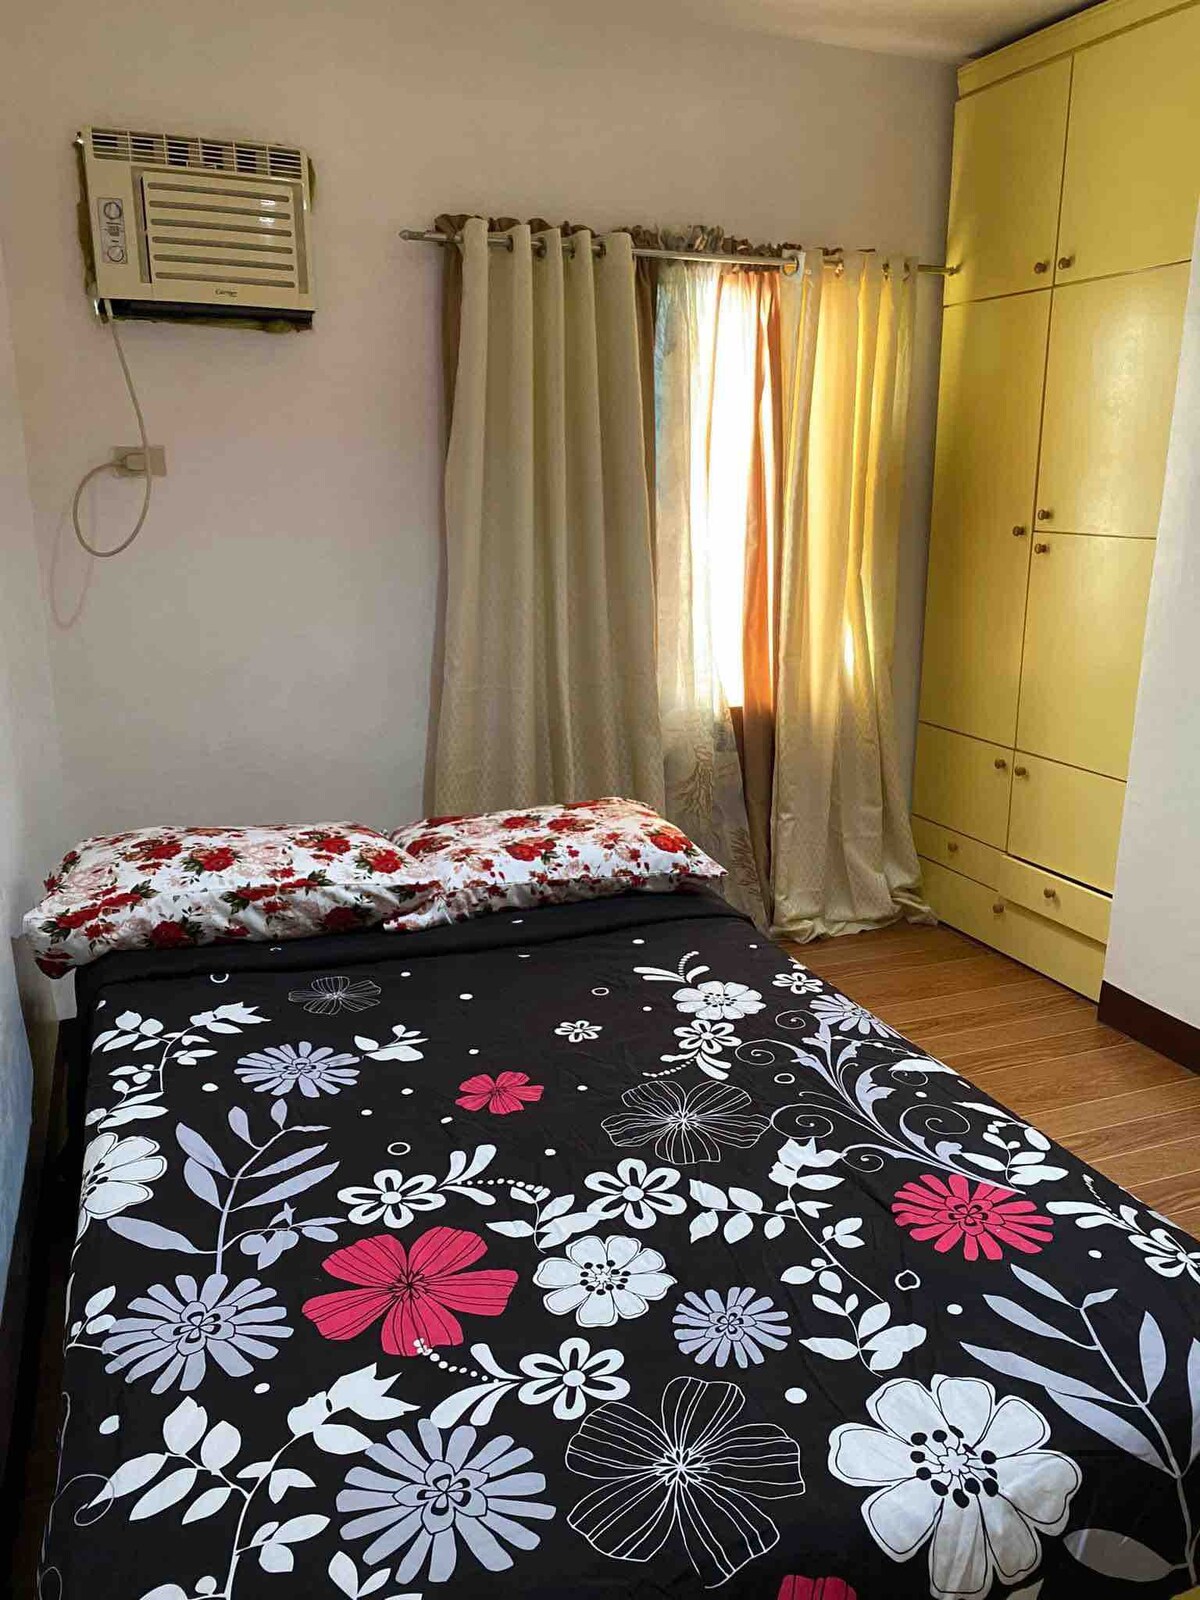 House for Rent
Callus09350911645